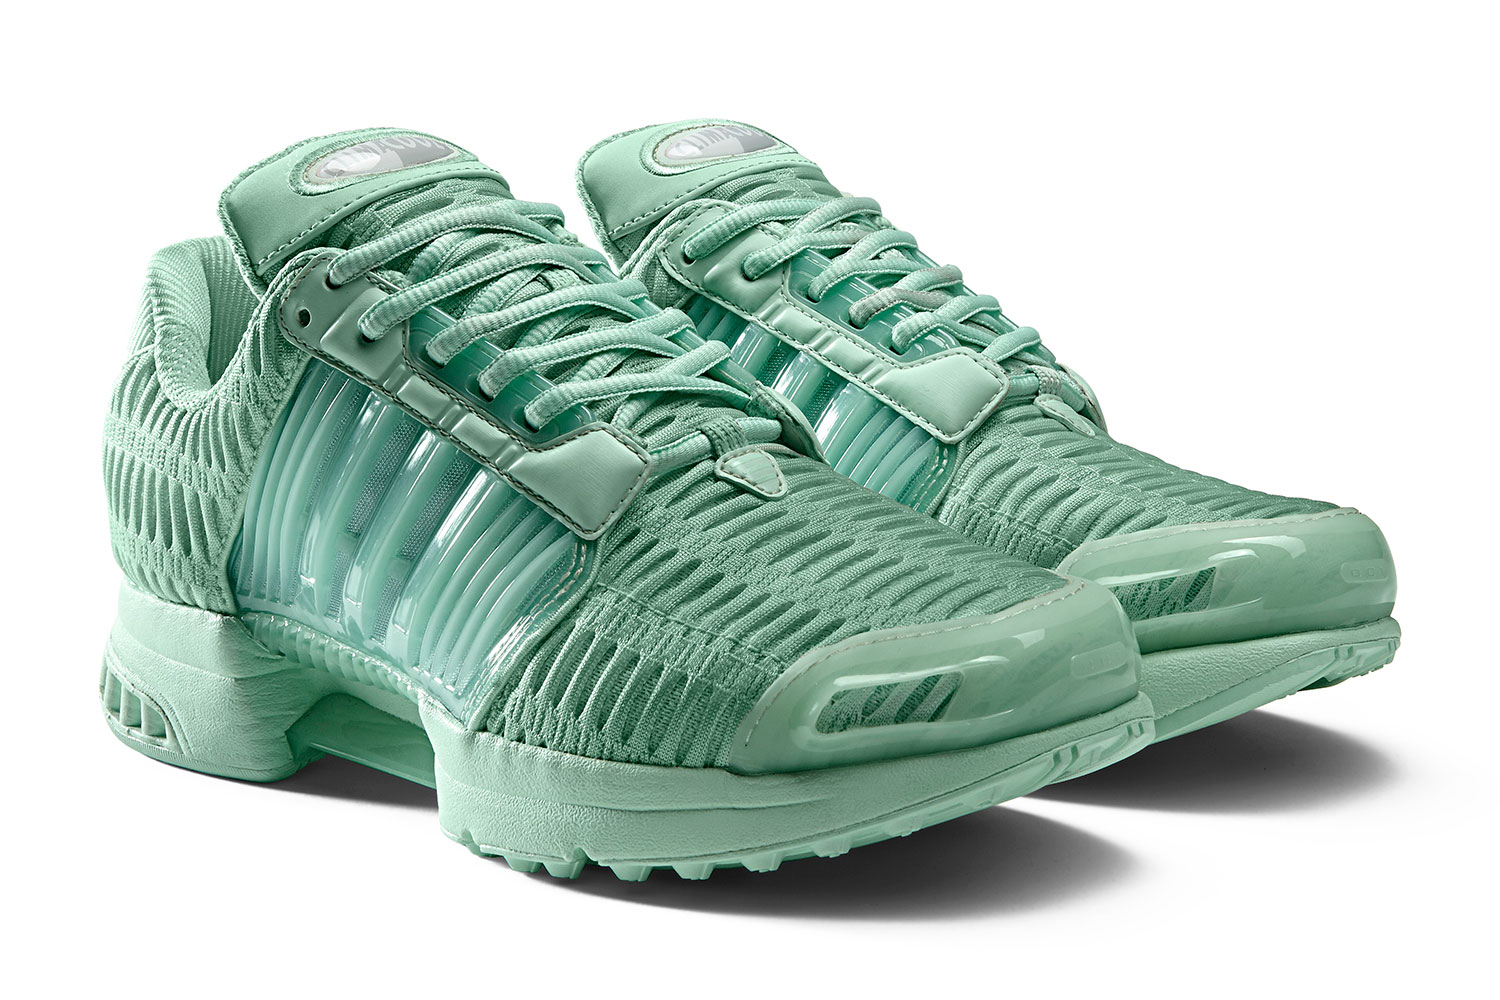 adidas release tonal climacool 1’s for Spring / Summer 2016